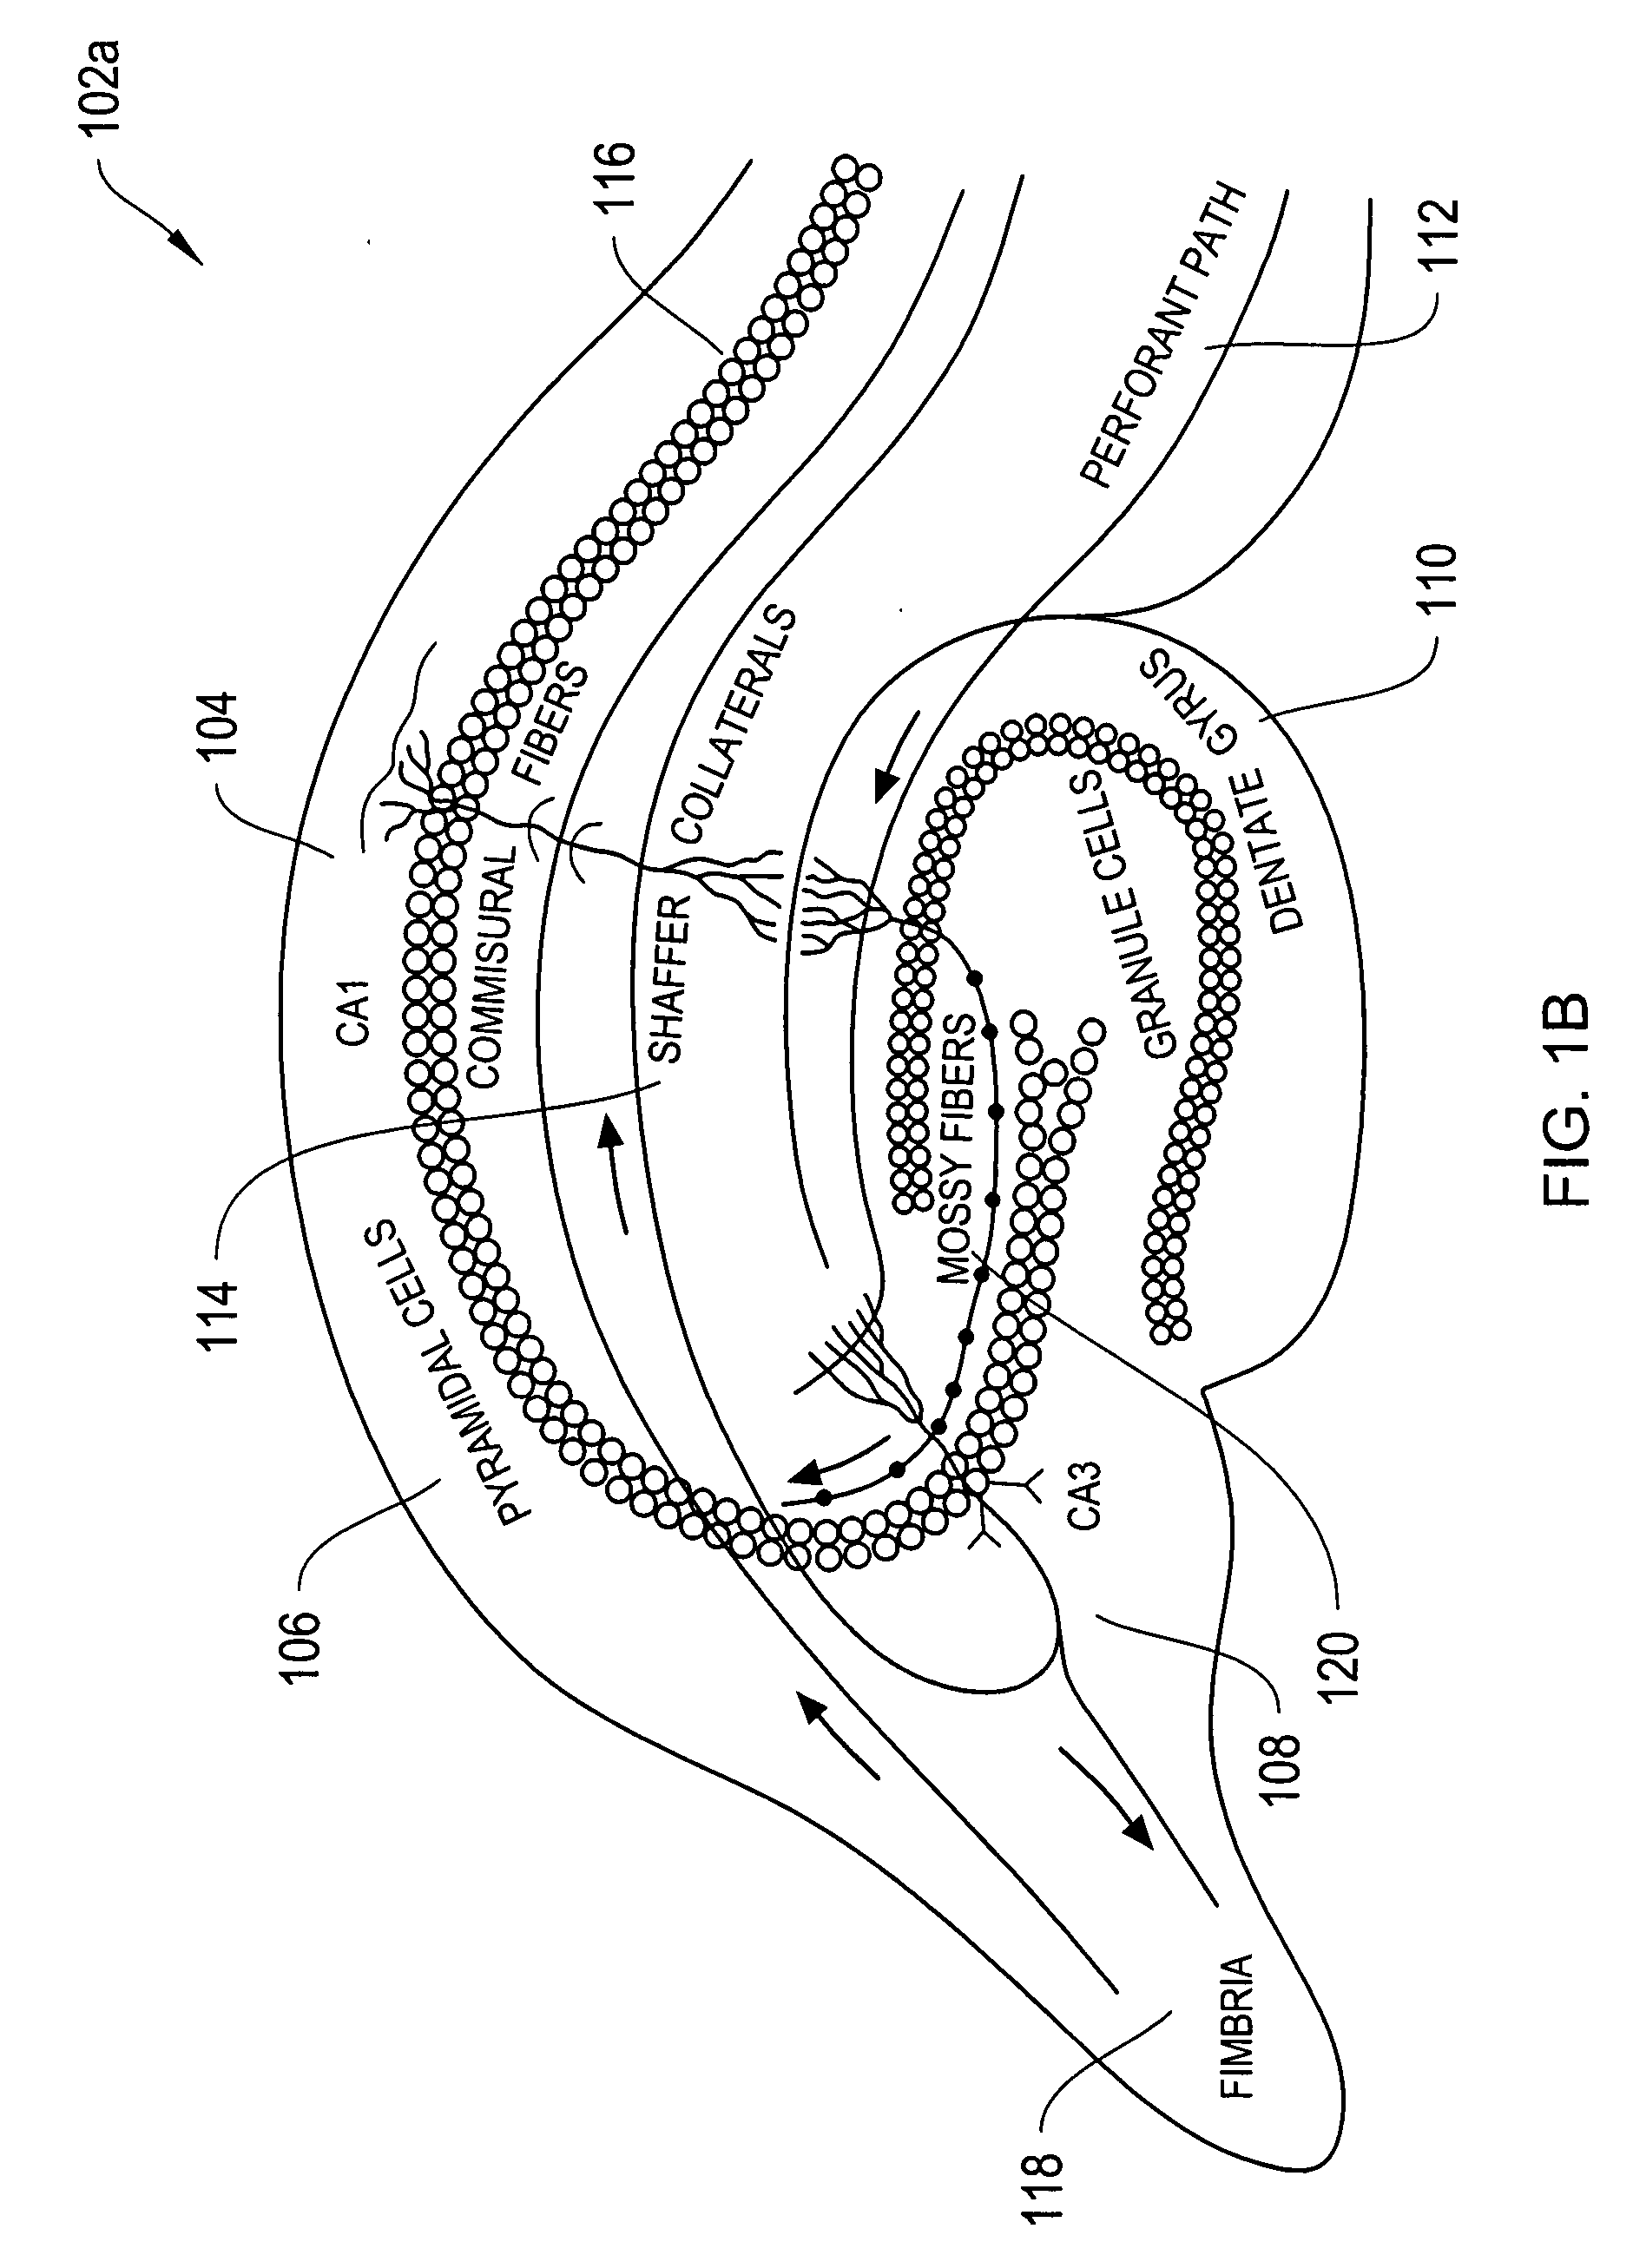 Systems and methods for improving a cognitive function